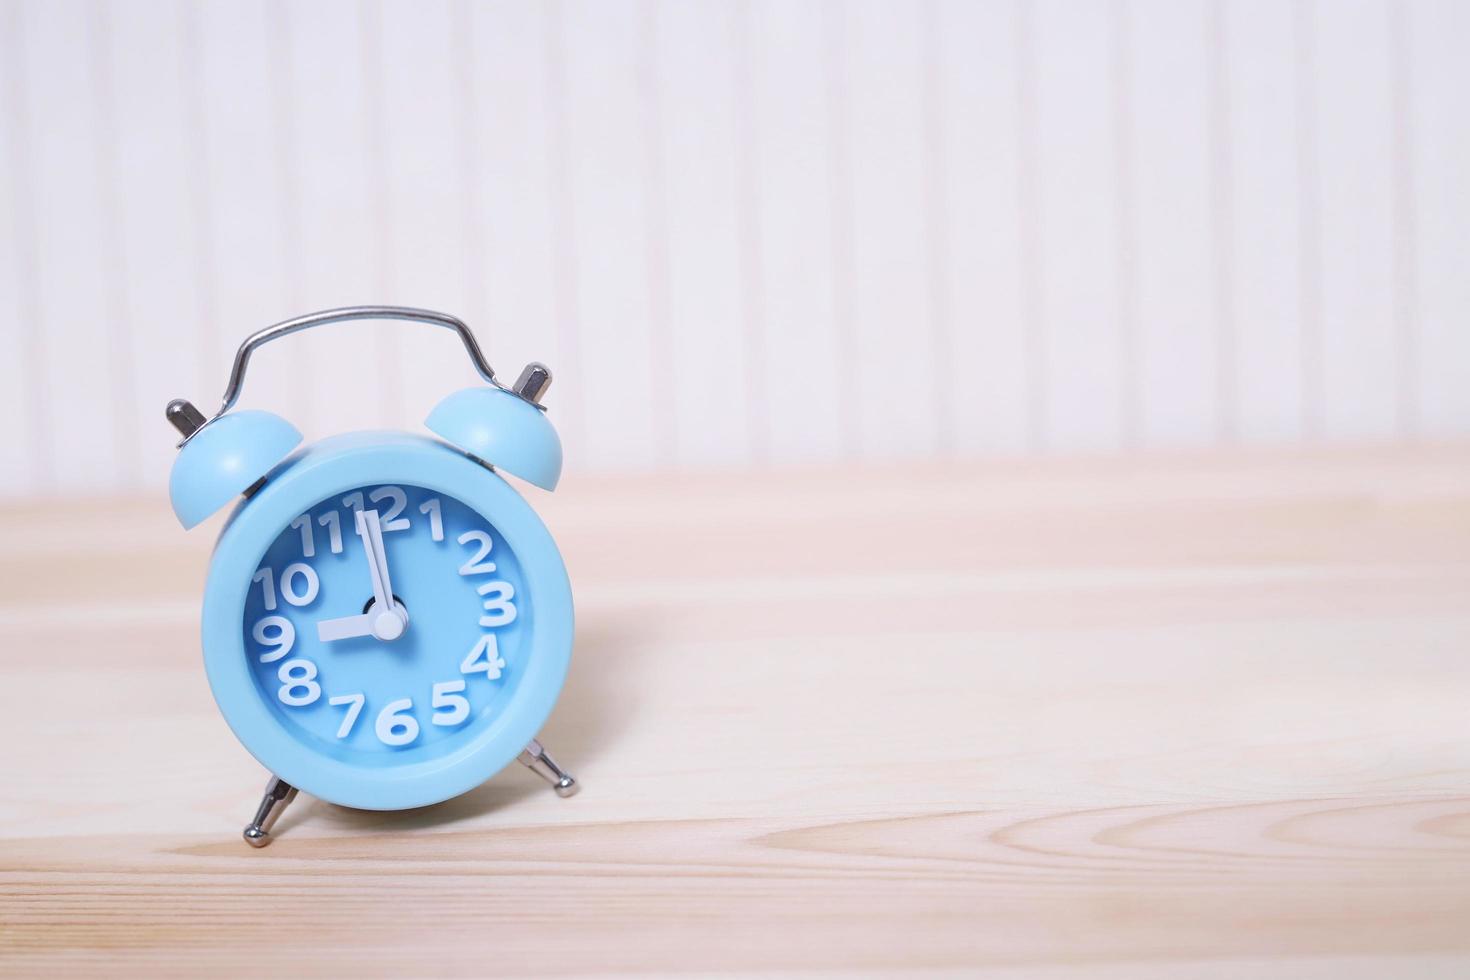 small sized old vintage retro alarm clock blue with bells , on wooden background wallpaper. photo